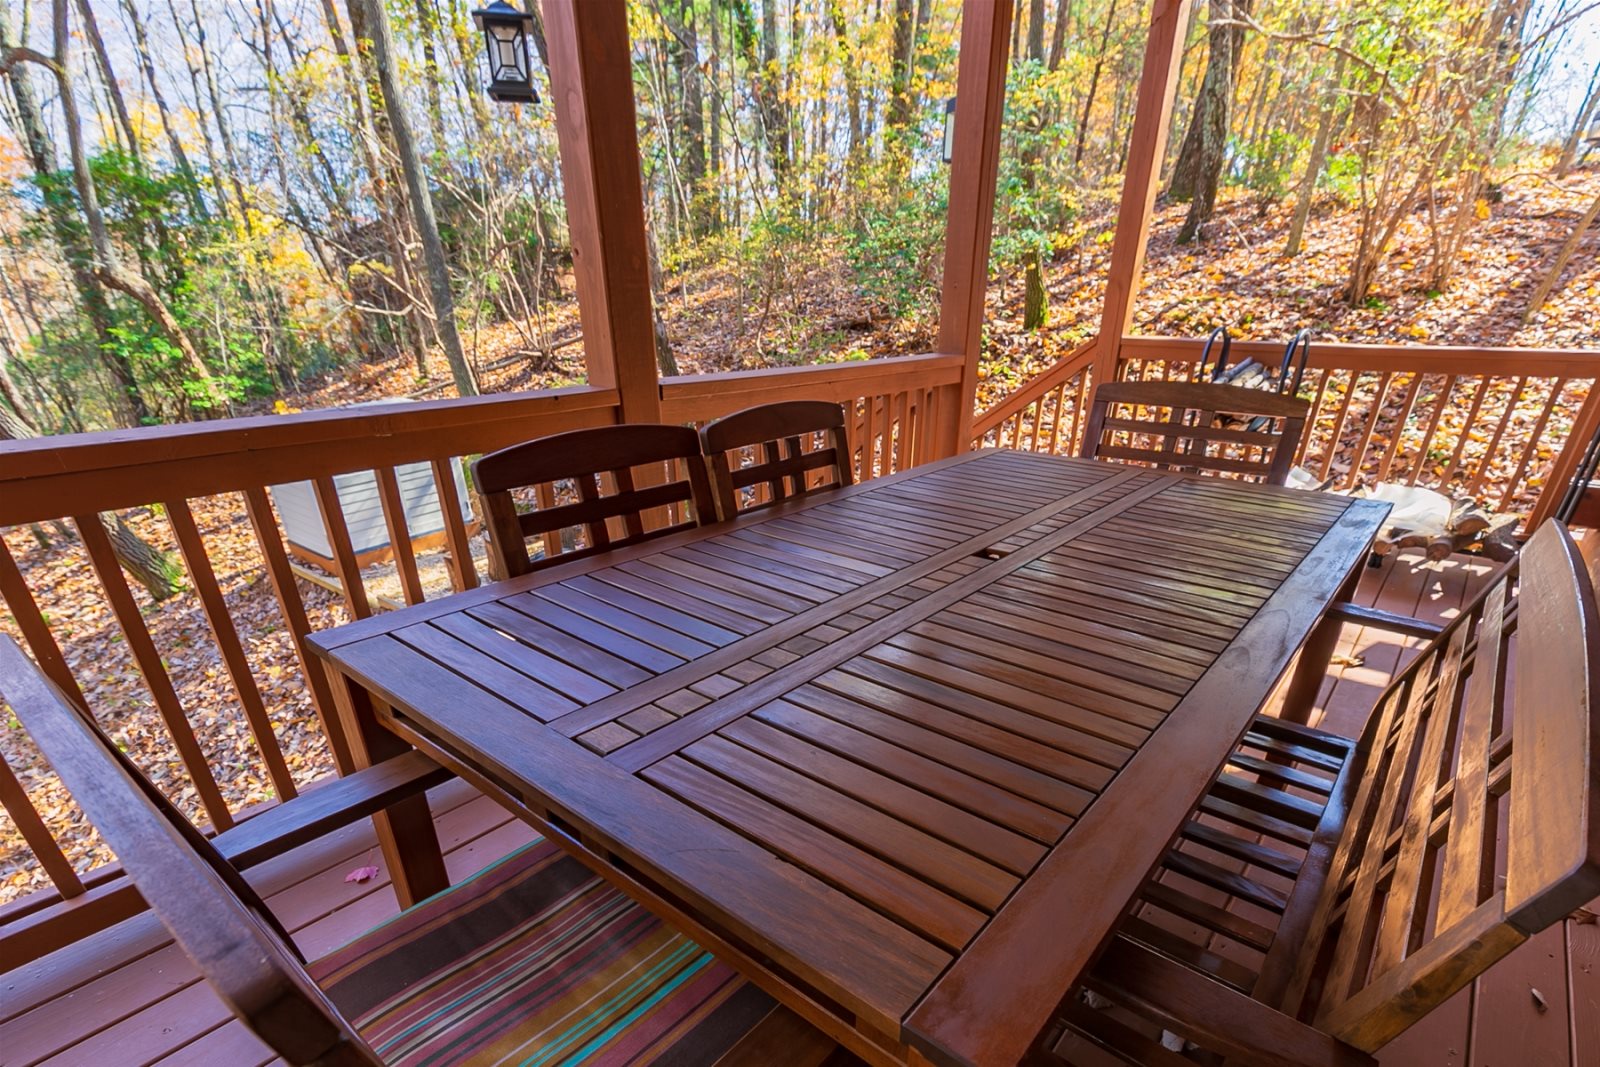 WineDown - Covered Deck Eating Area